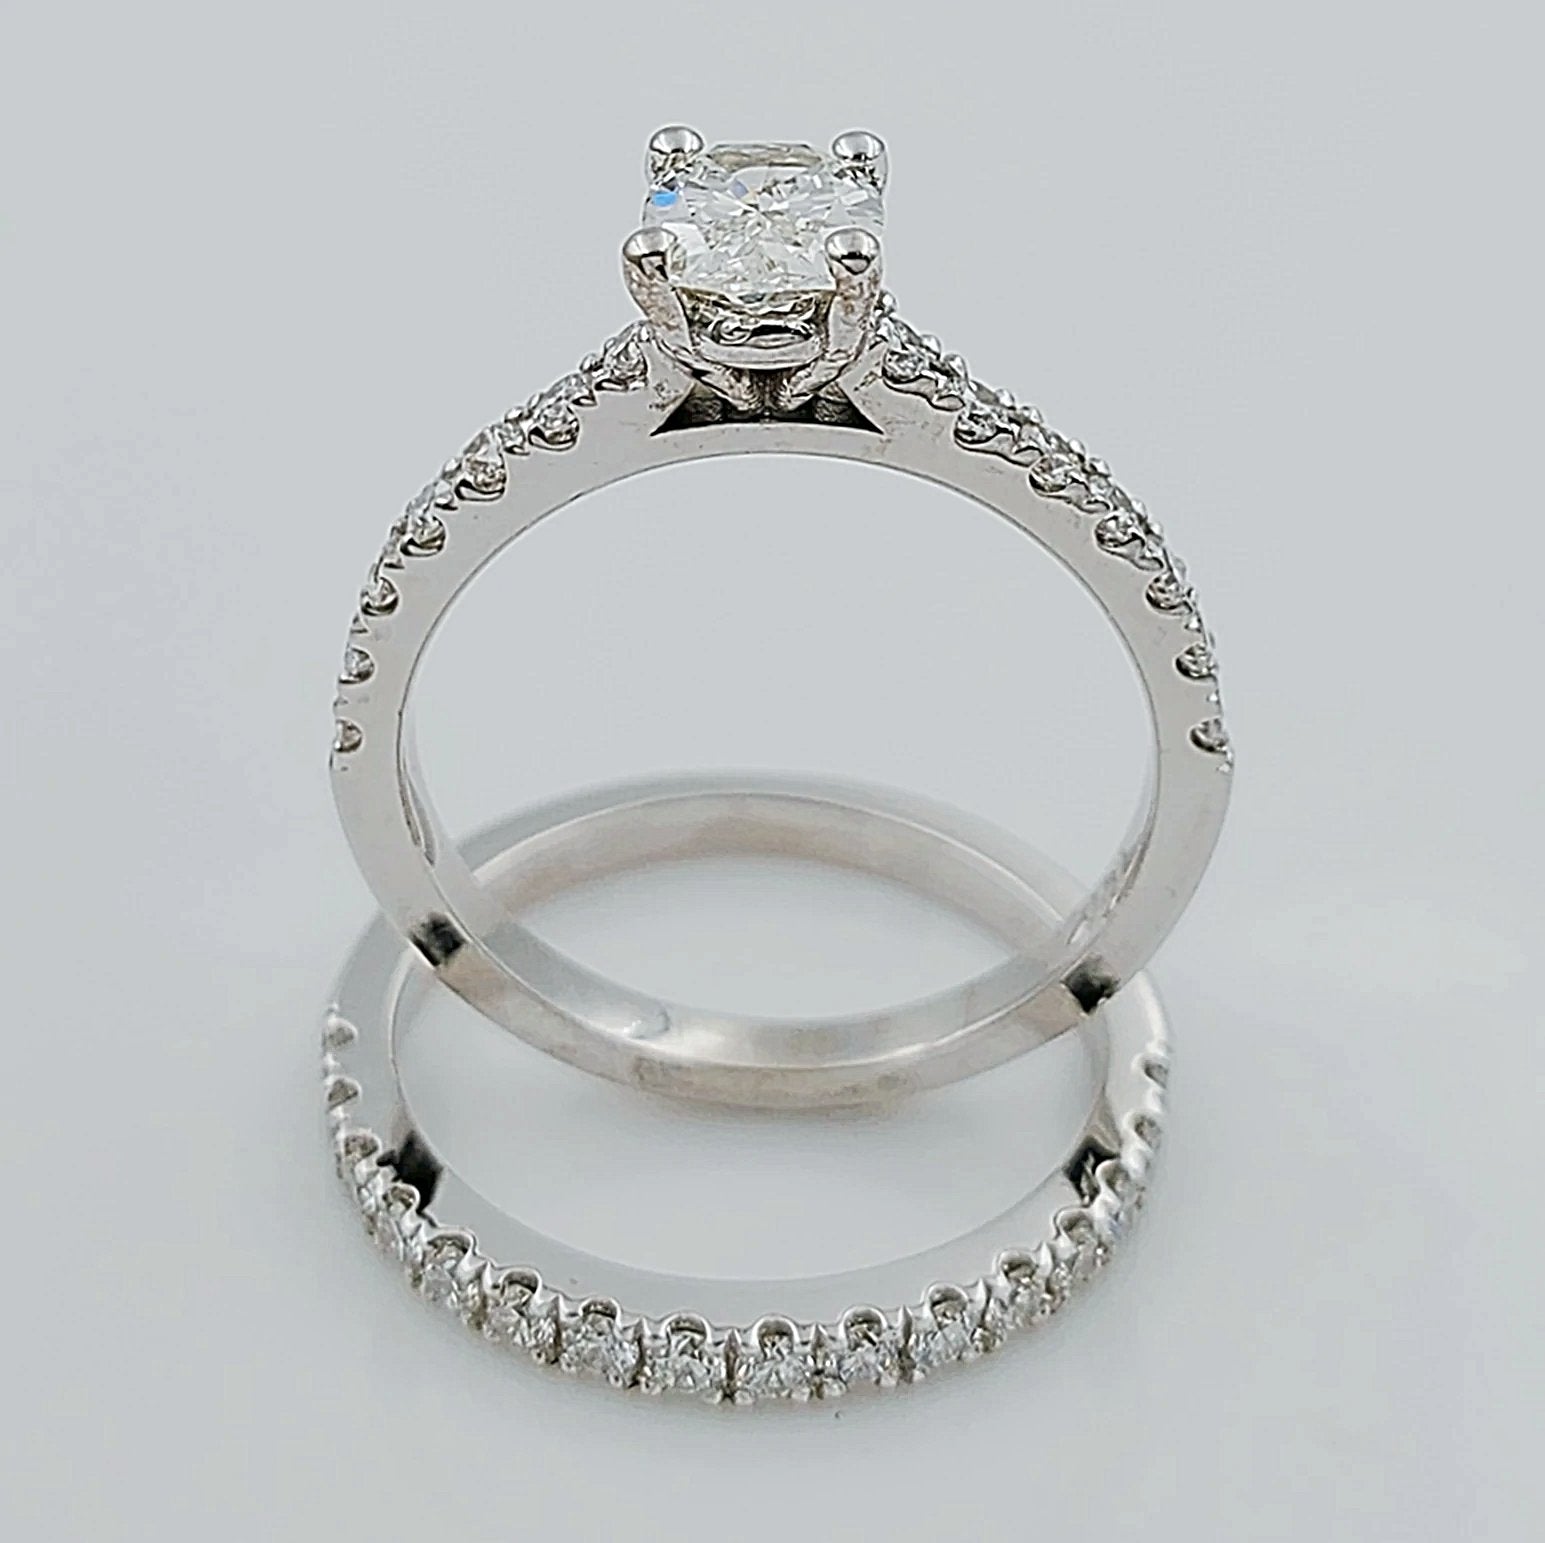 Women's 14K White Gold with Oval 0.64 CT Center (SI Color I) Diamond 4.9 GR Total Weight Bridal Ring Set. (Size: 6.0)